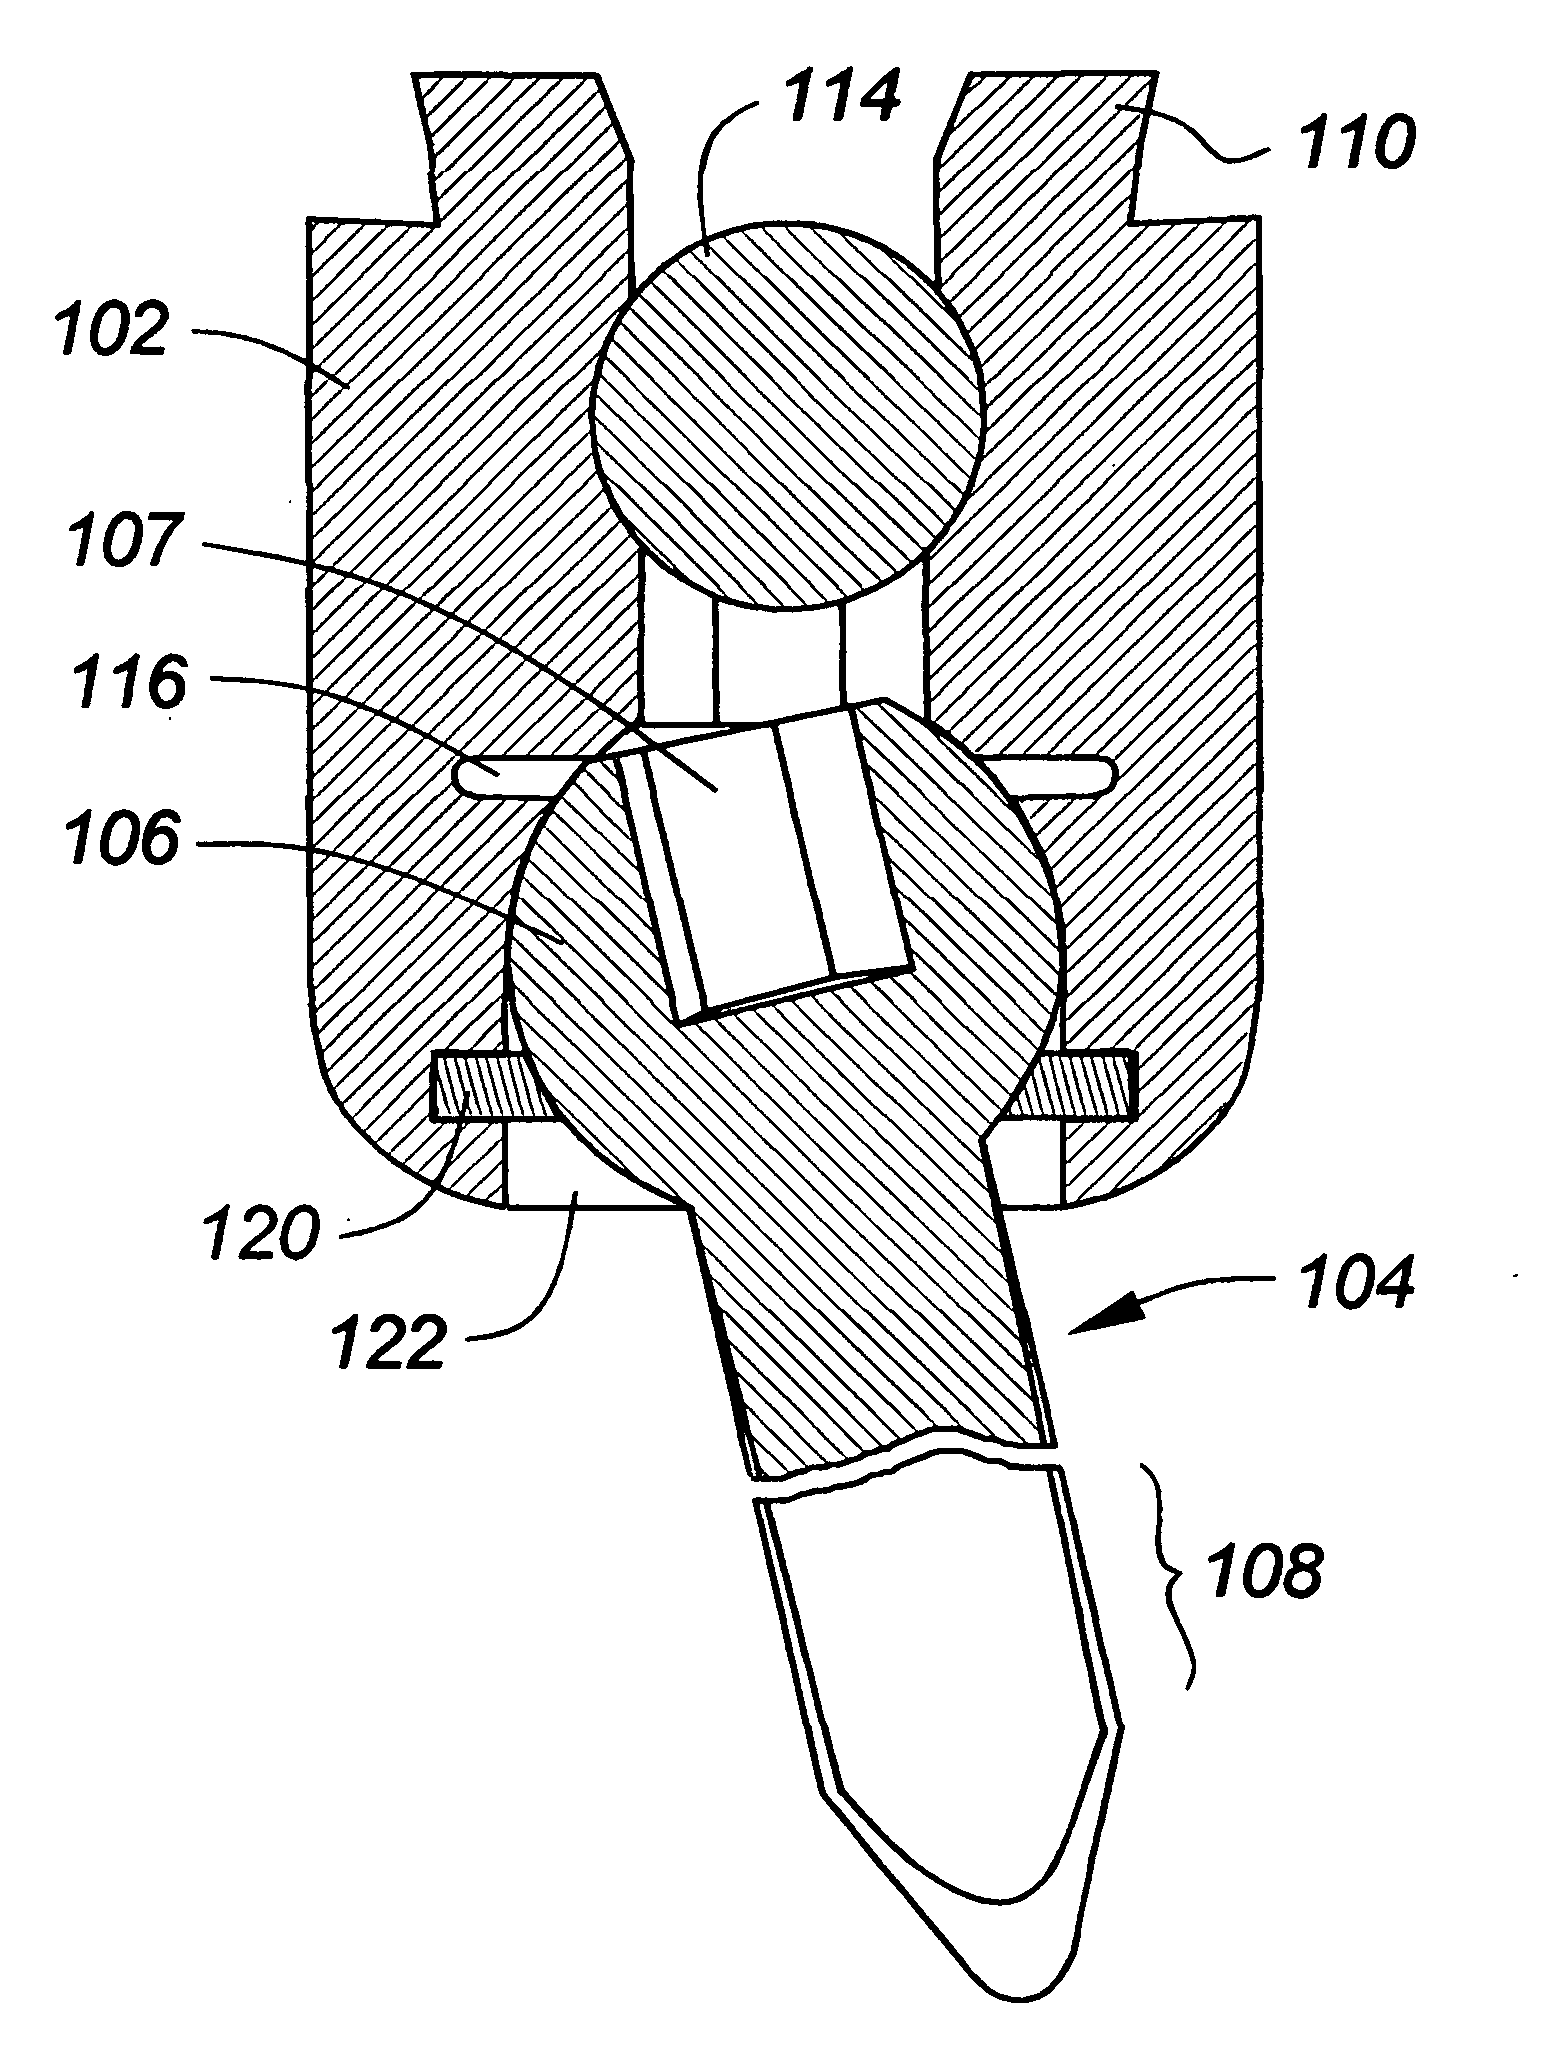 Spinal correction system with multi-stage locking mechanism